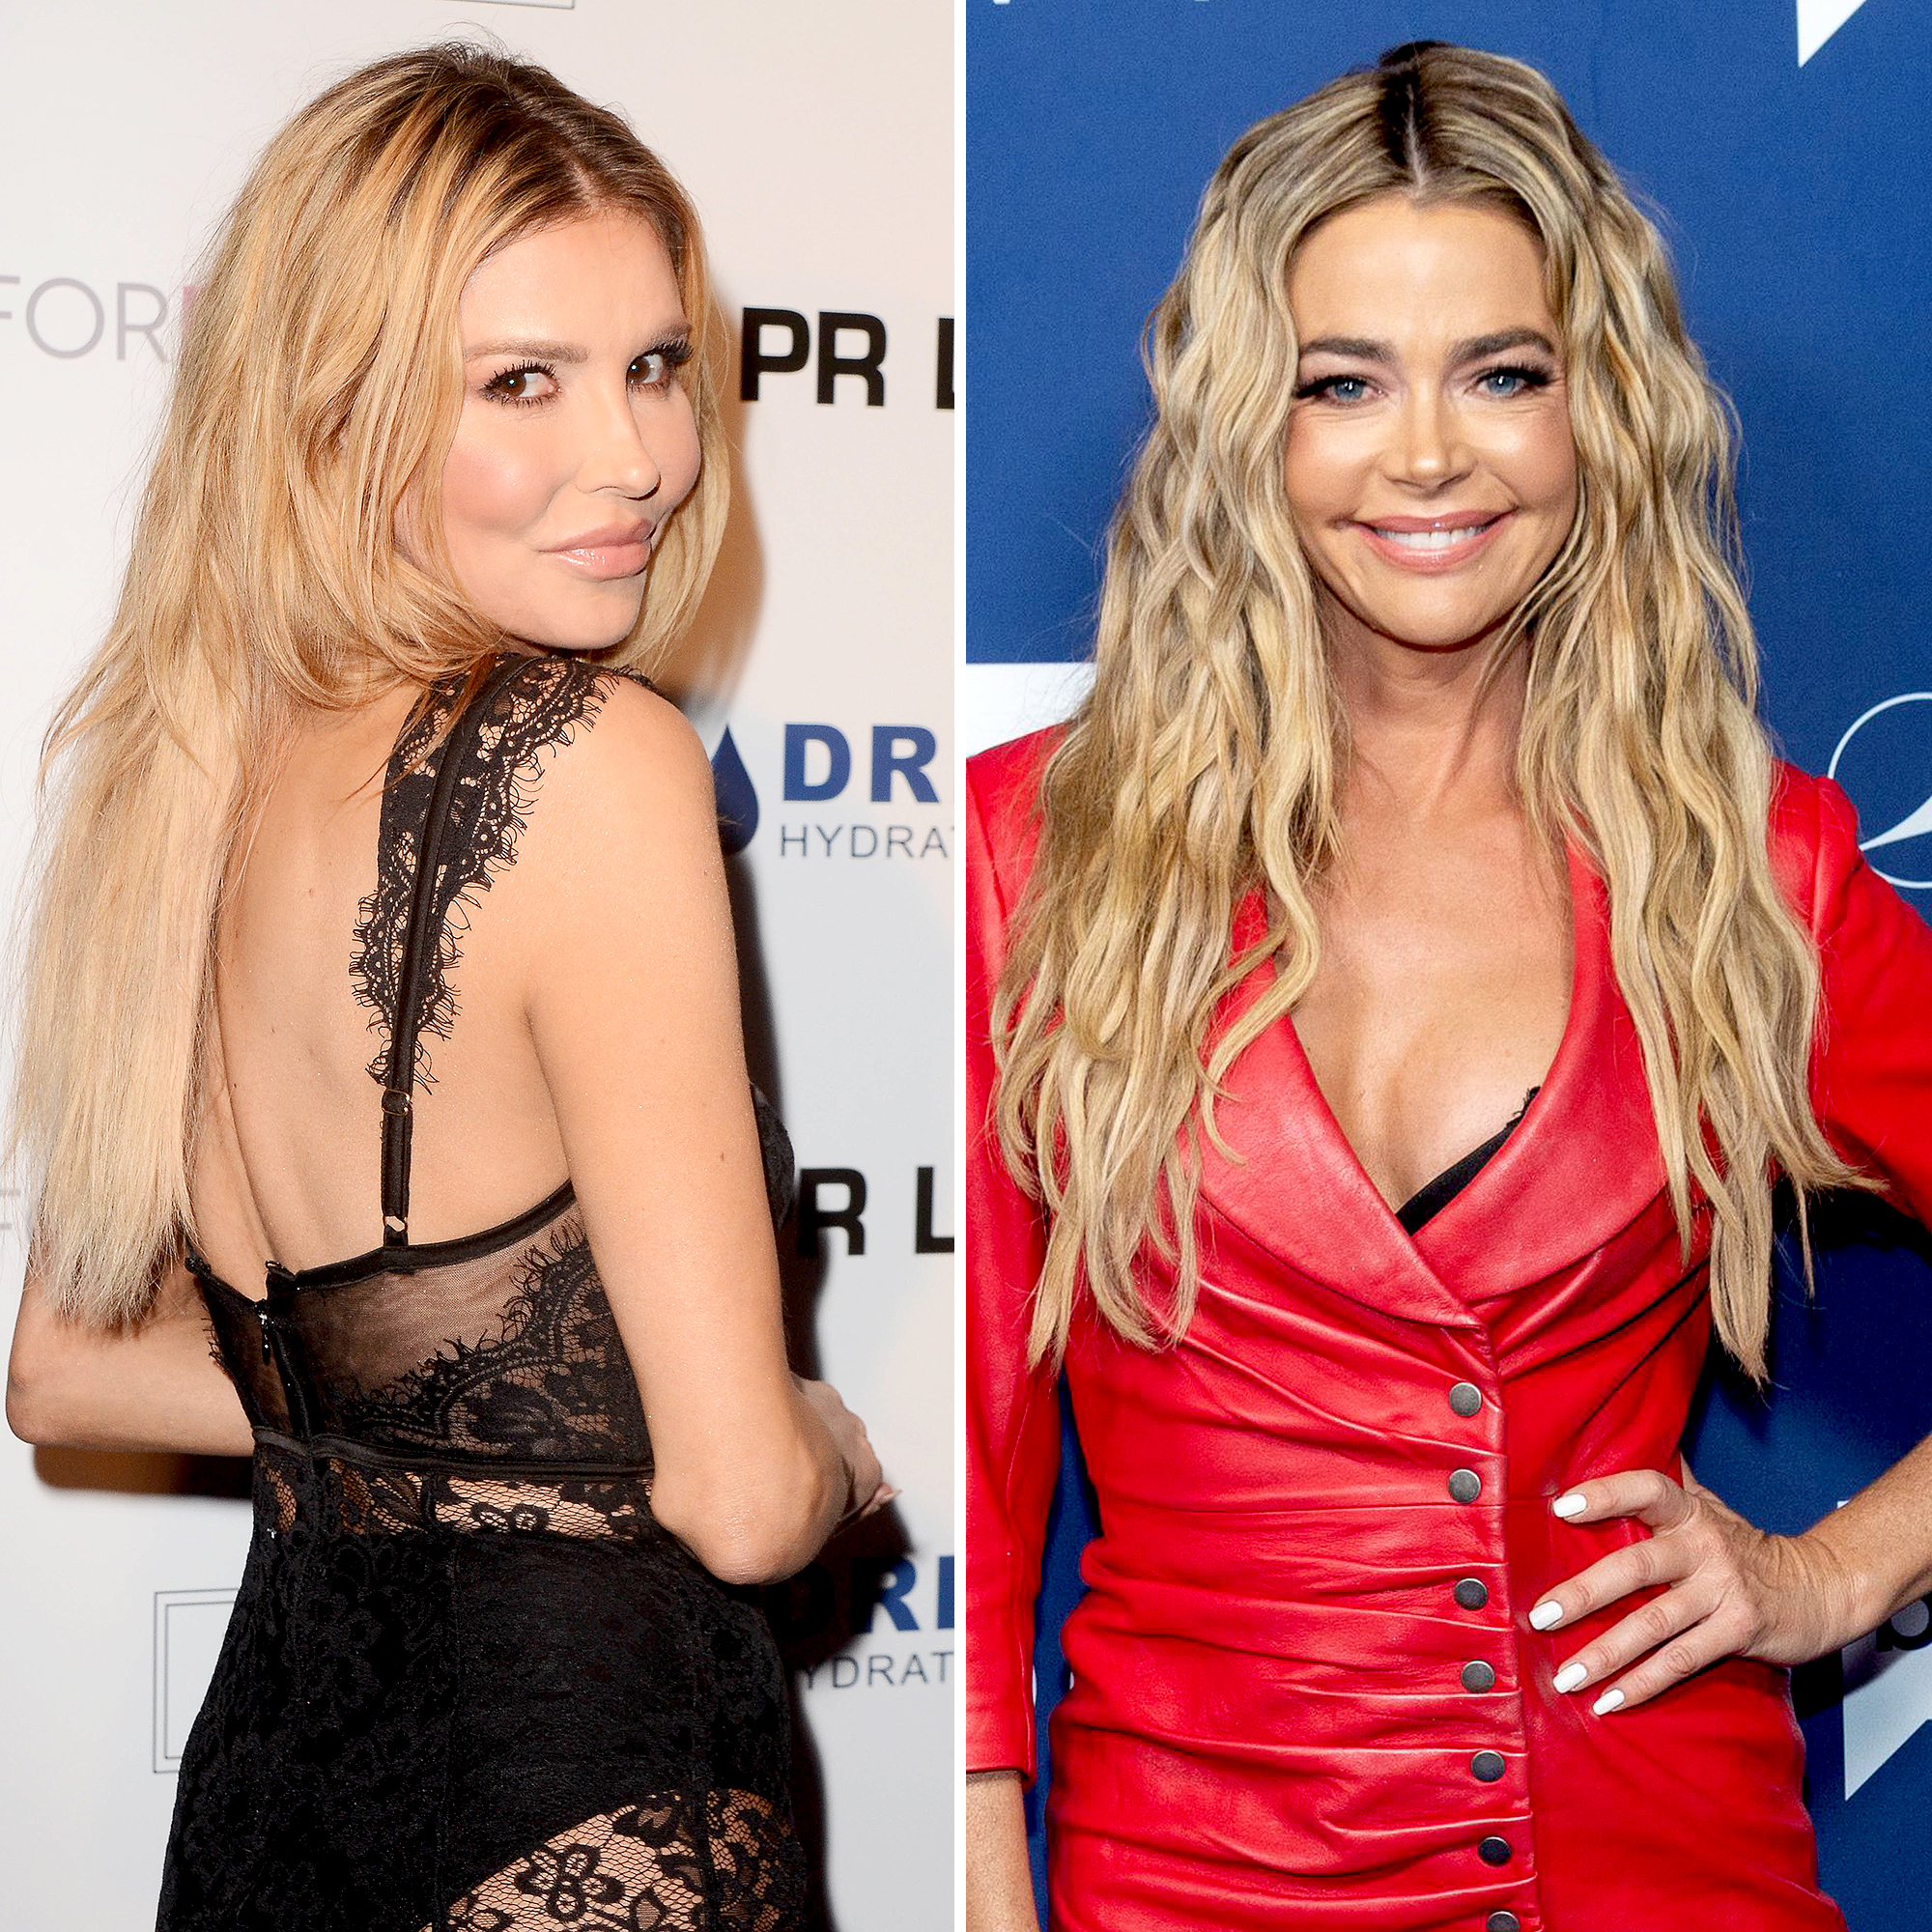 Dpg And Girl Sexey Viedo - Brandi Glanville Details 'Sexy' 1st Hookup With Denise Richards